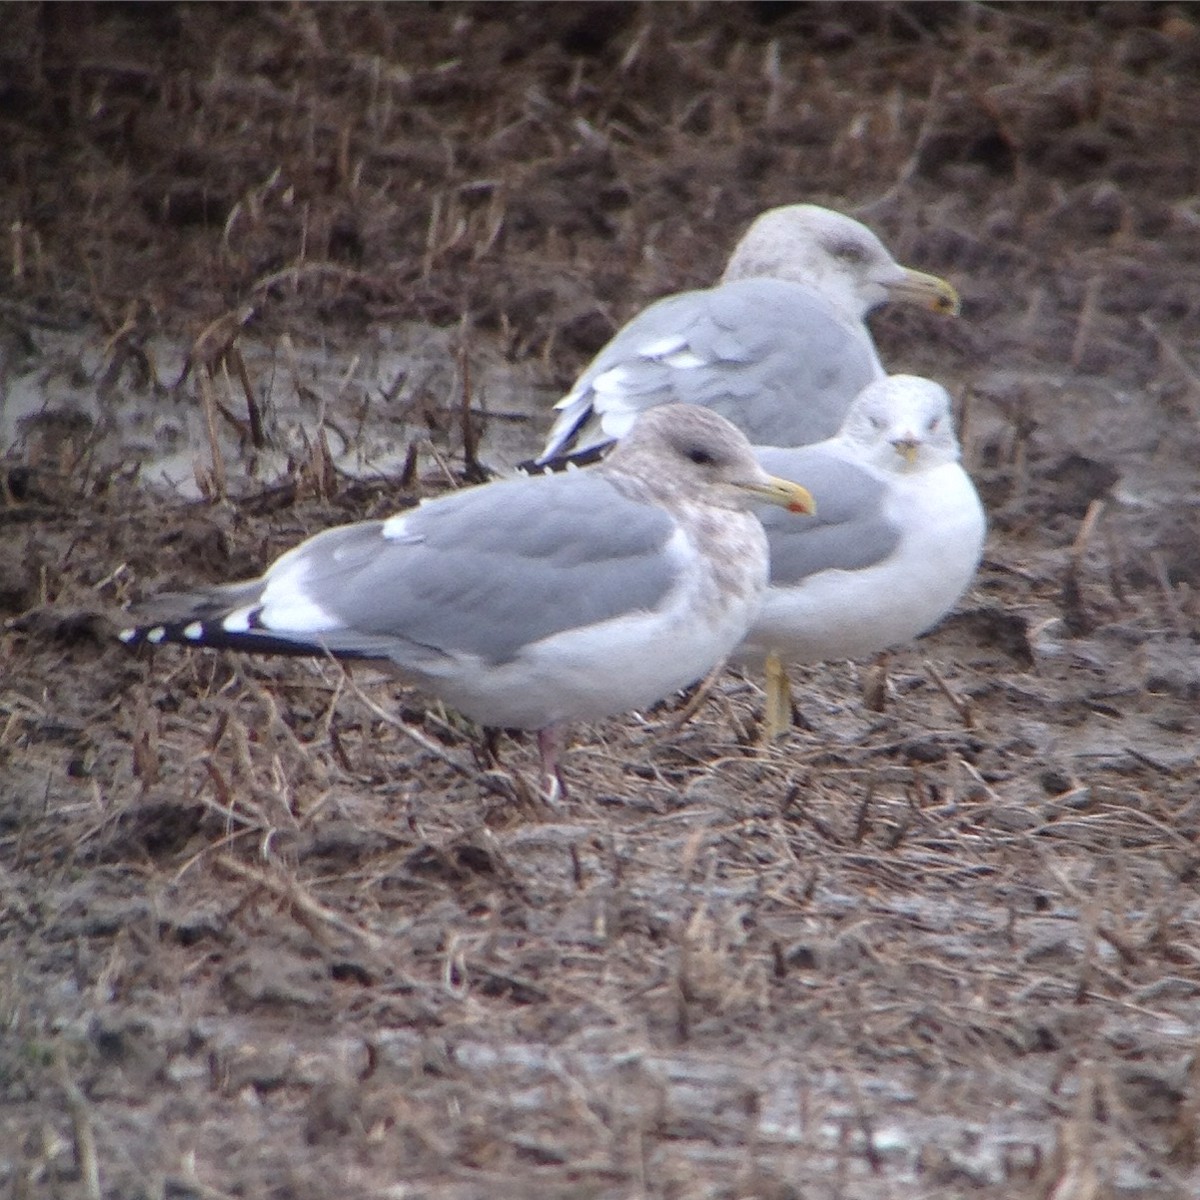 Adult Iceland “Thayer’s” Gull found by Jeremy Hatt and Kory Renaud on December 29, 2015 – photo by Jeremy Hatt